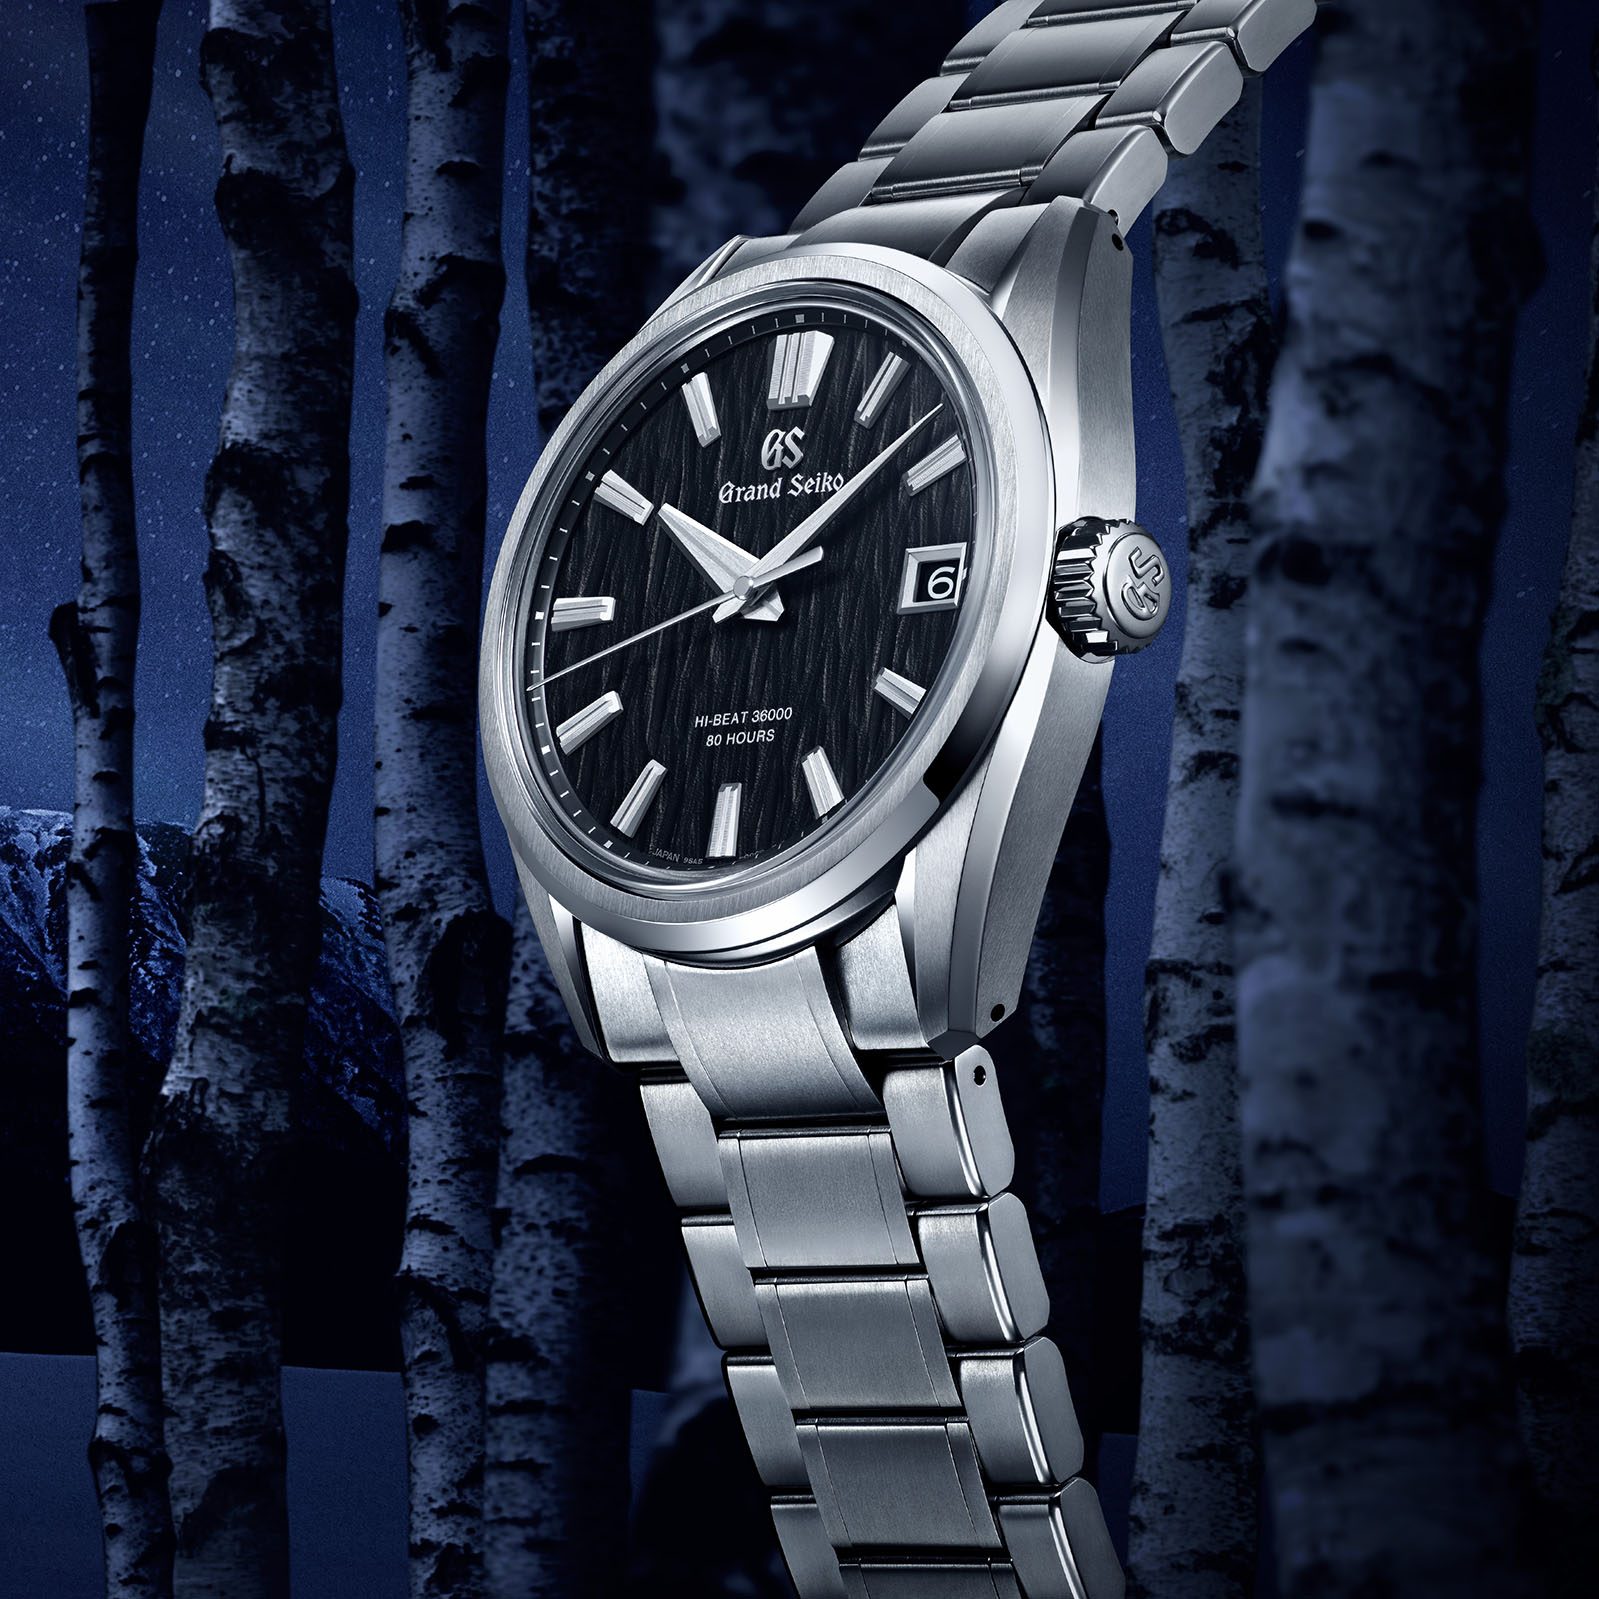 Grand Seiko Expands their Birch Offerings Once More with the SLGH017 “Night  Birch” + Introducing the New Tudor Ranger | WatchinTyme